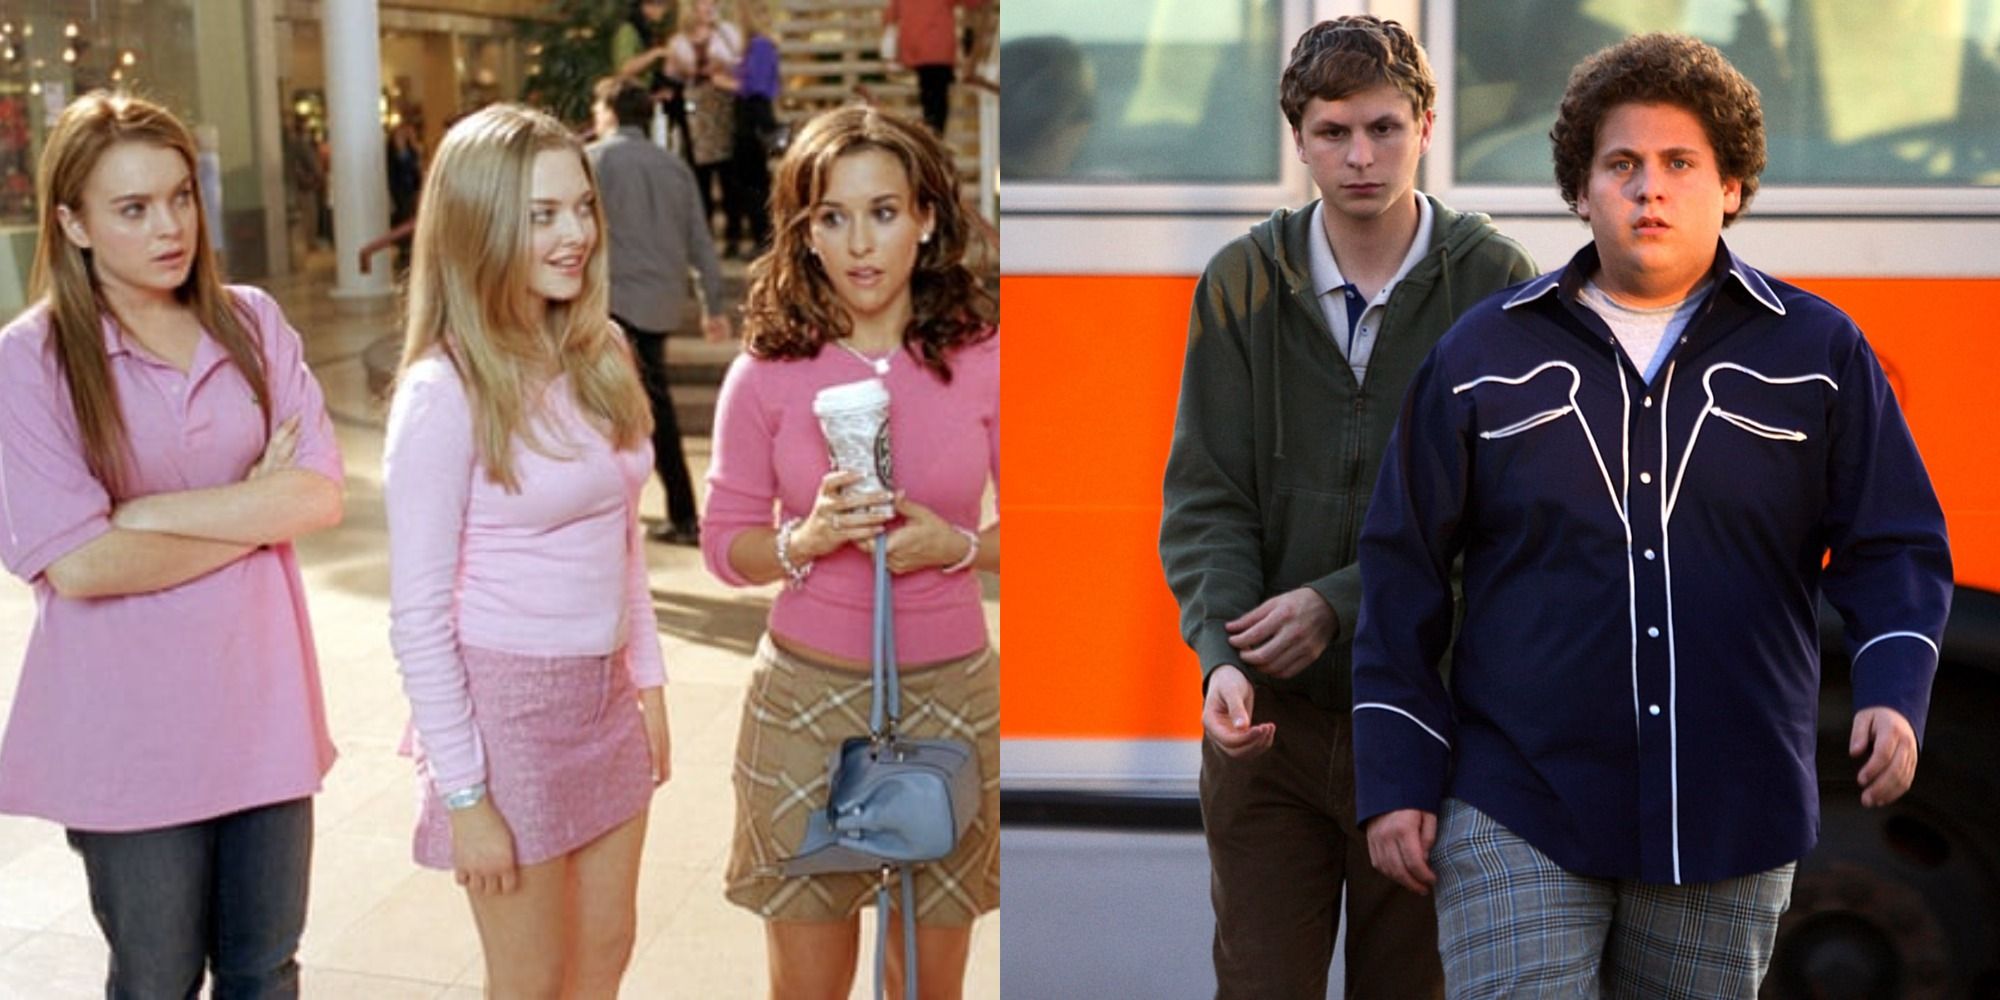 Split image showing Cady, Karen, and Gretchen at the mall, and Evan and Seth walking